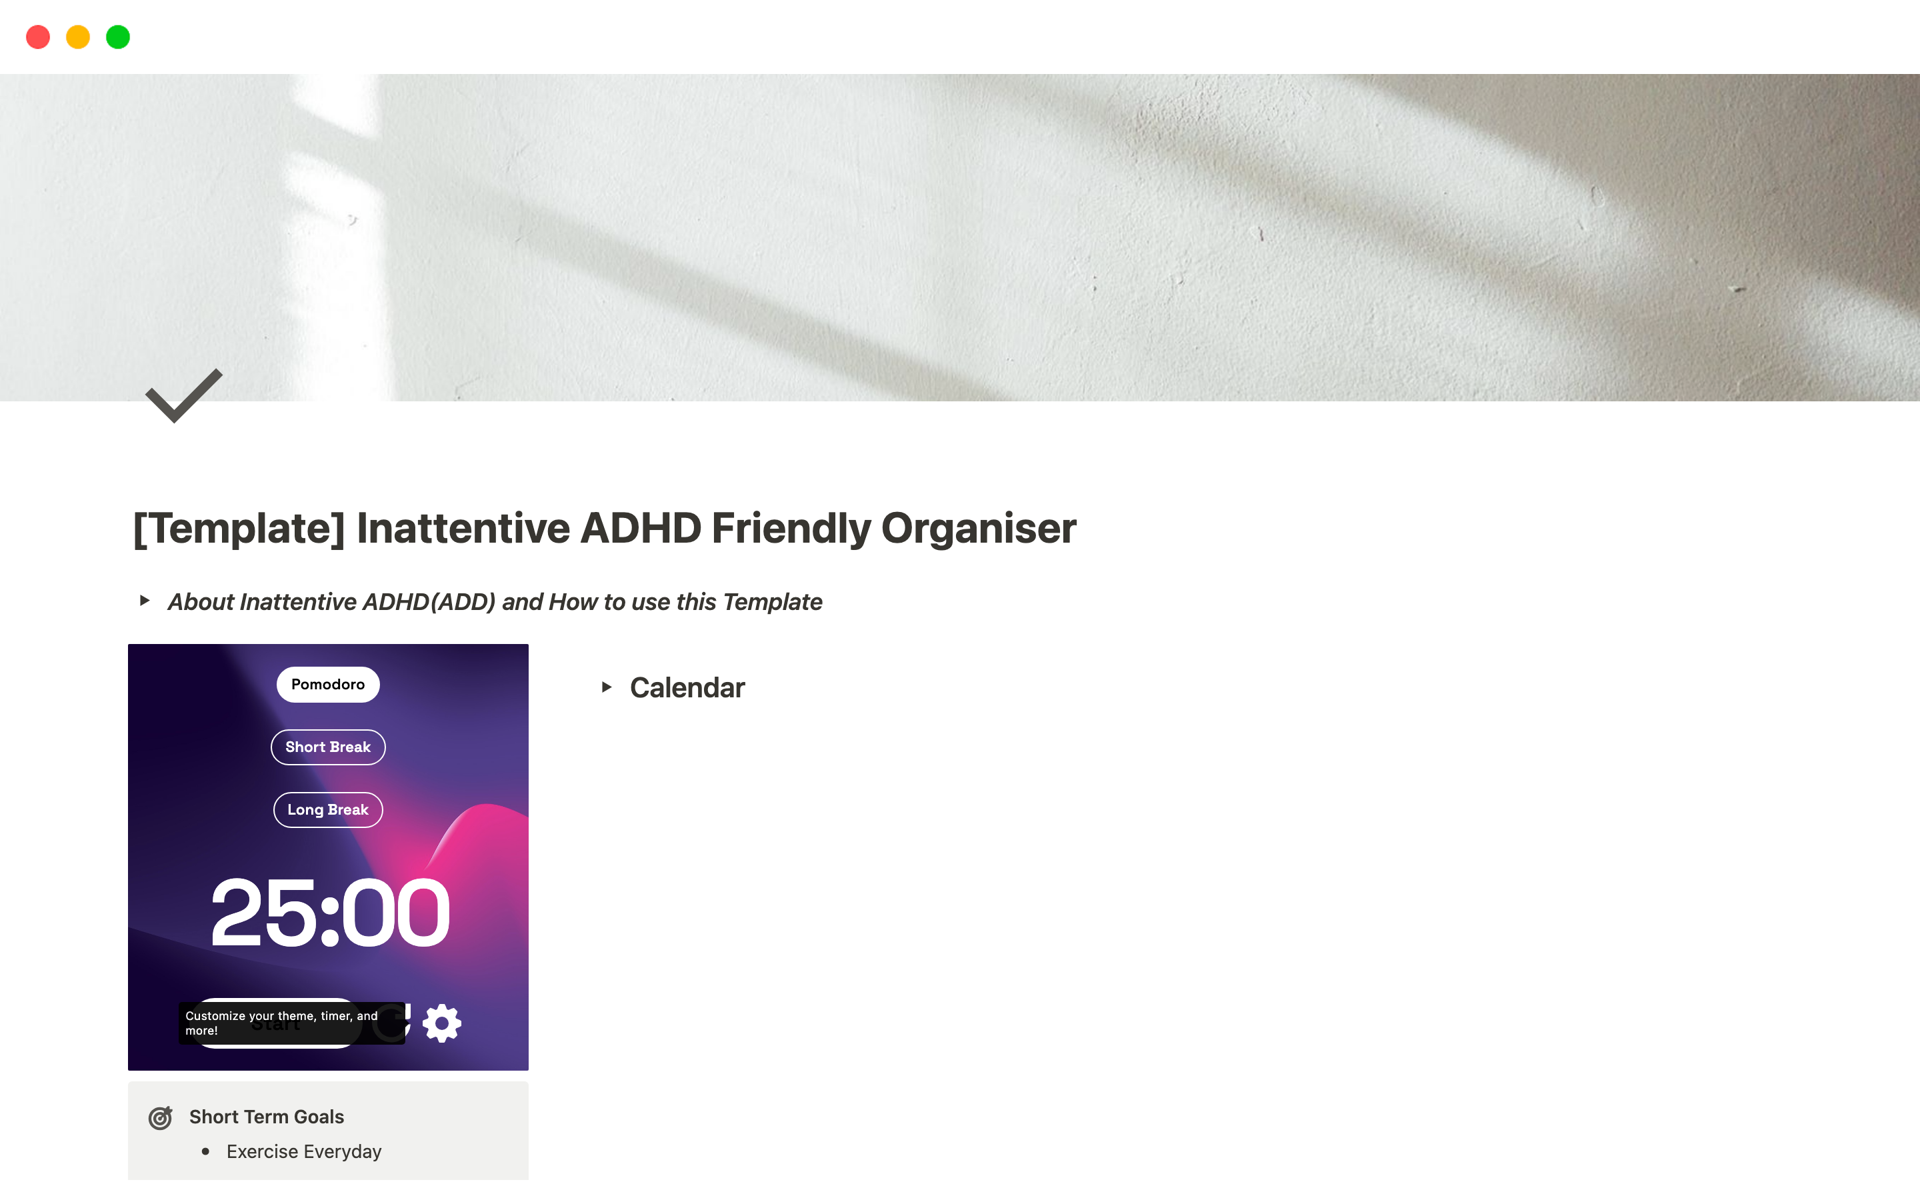 Tired of the daily struggle to stay on top of your tasks and goals? Our inattentive ADHD Organiser is your secret weapon for unlocking your full potential. Designed with scientifically proven techniques to cater to your unique ADHD needs. 